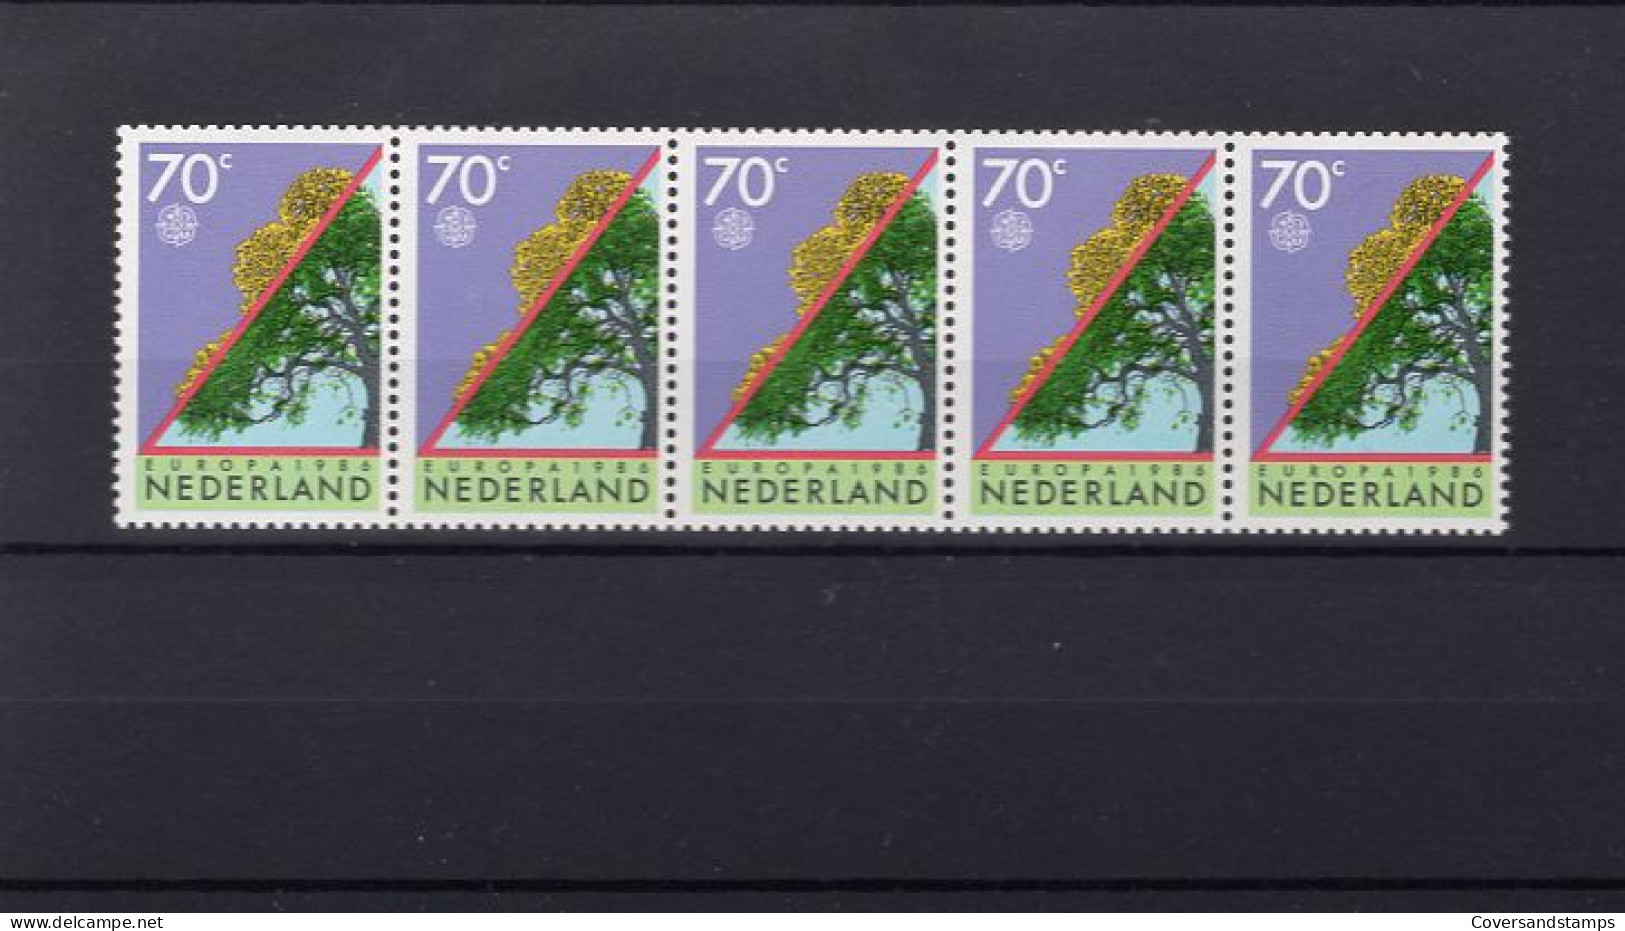  Netherlands - NVPH 1354 In Strips Of 5, Number 00160  ** MNH - 1986